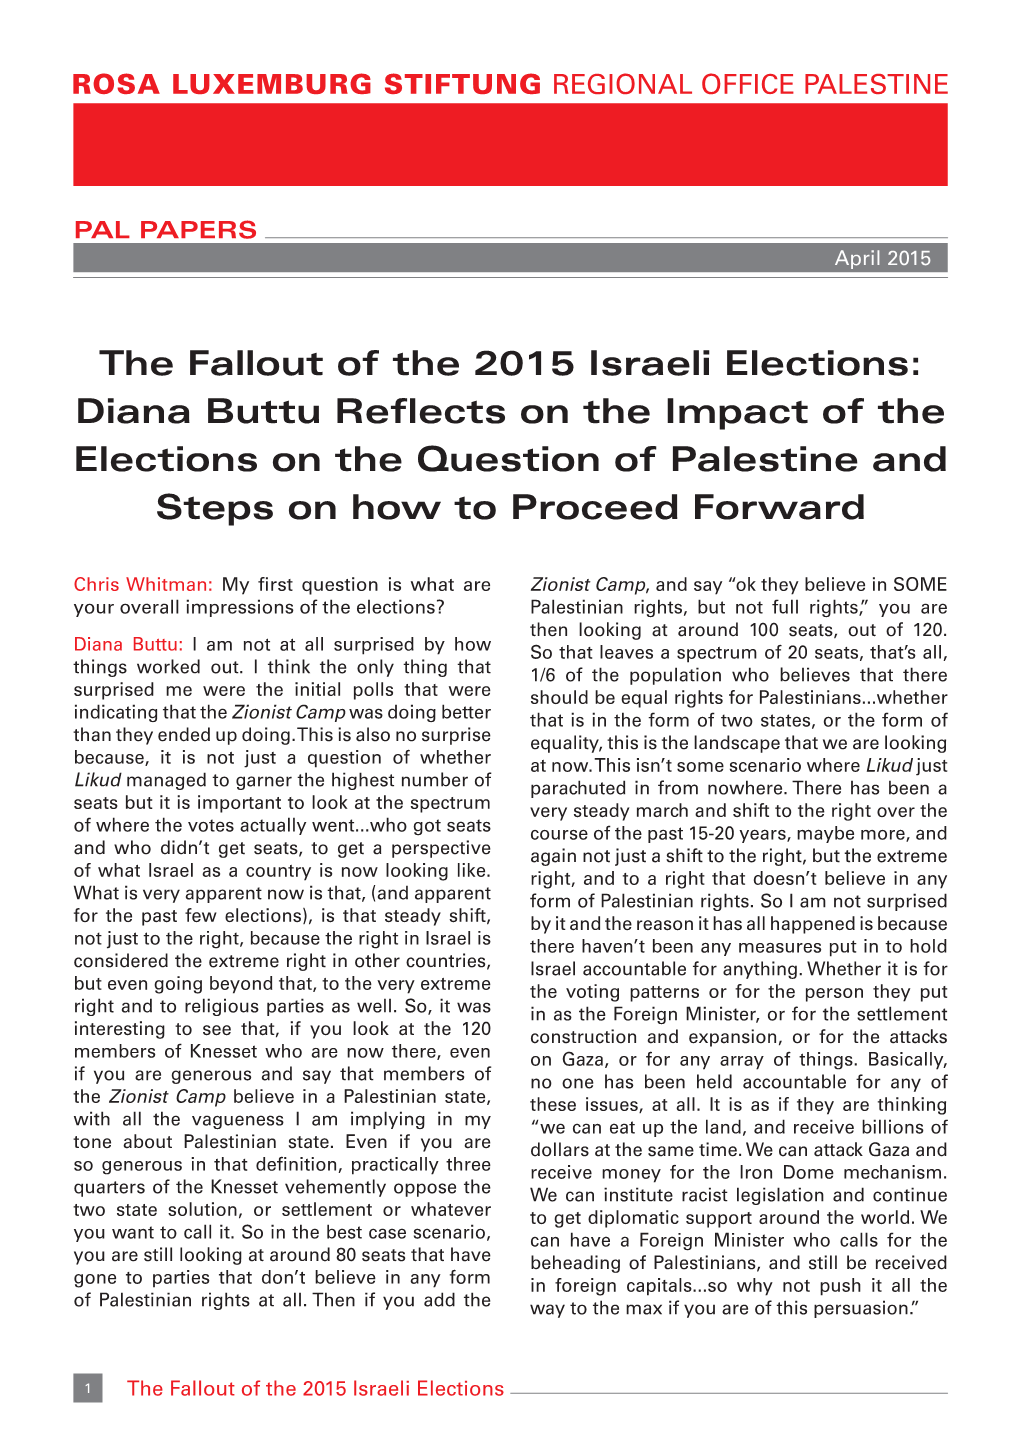 The Fallout of the 2015 Israeli Elections. Interview with Diana Buttu